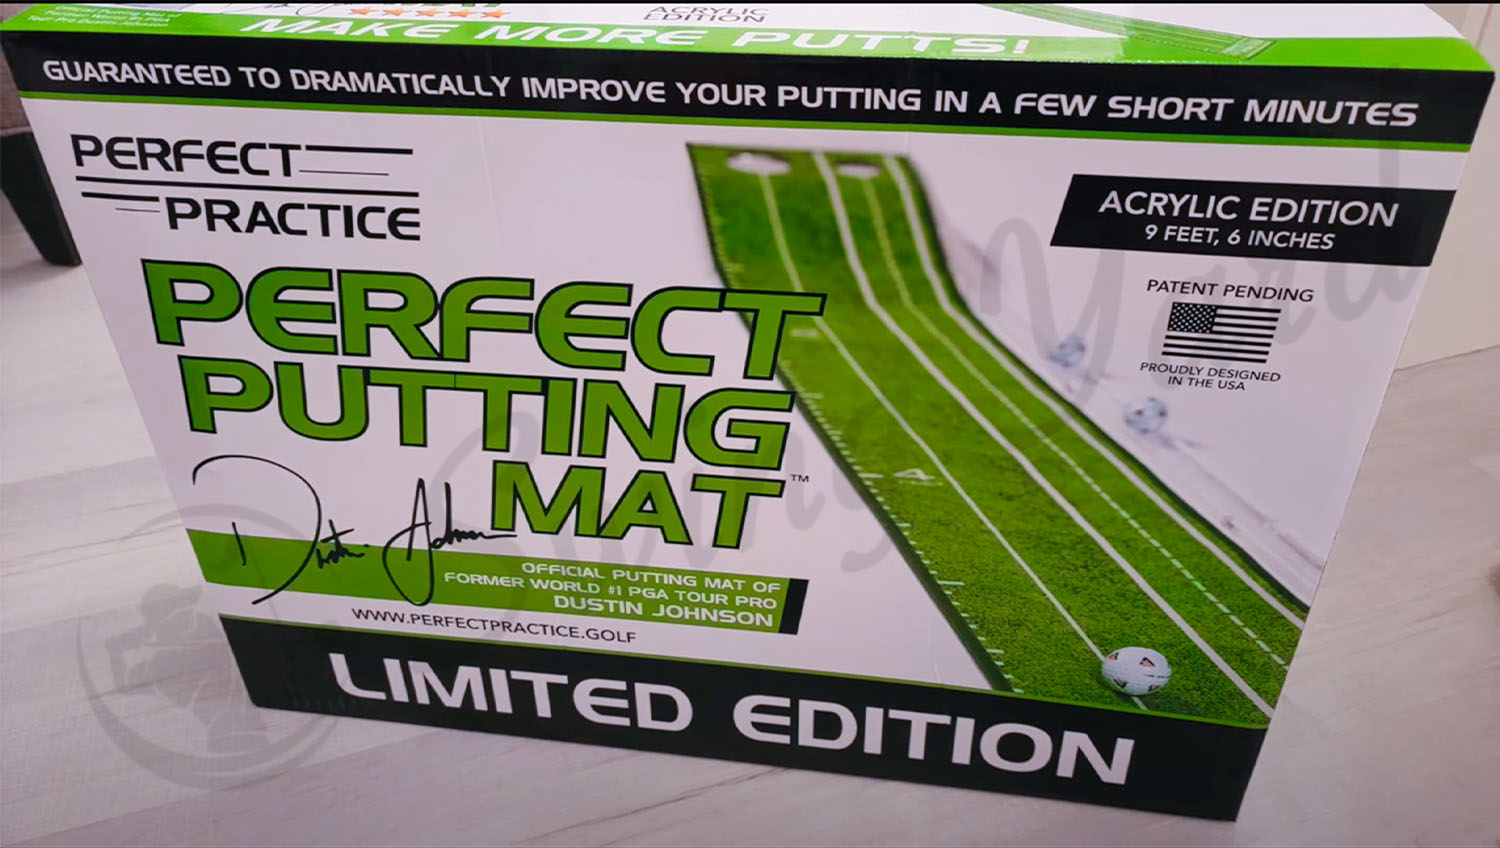 Packaging box of the Perfect Practice Putting Mat